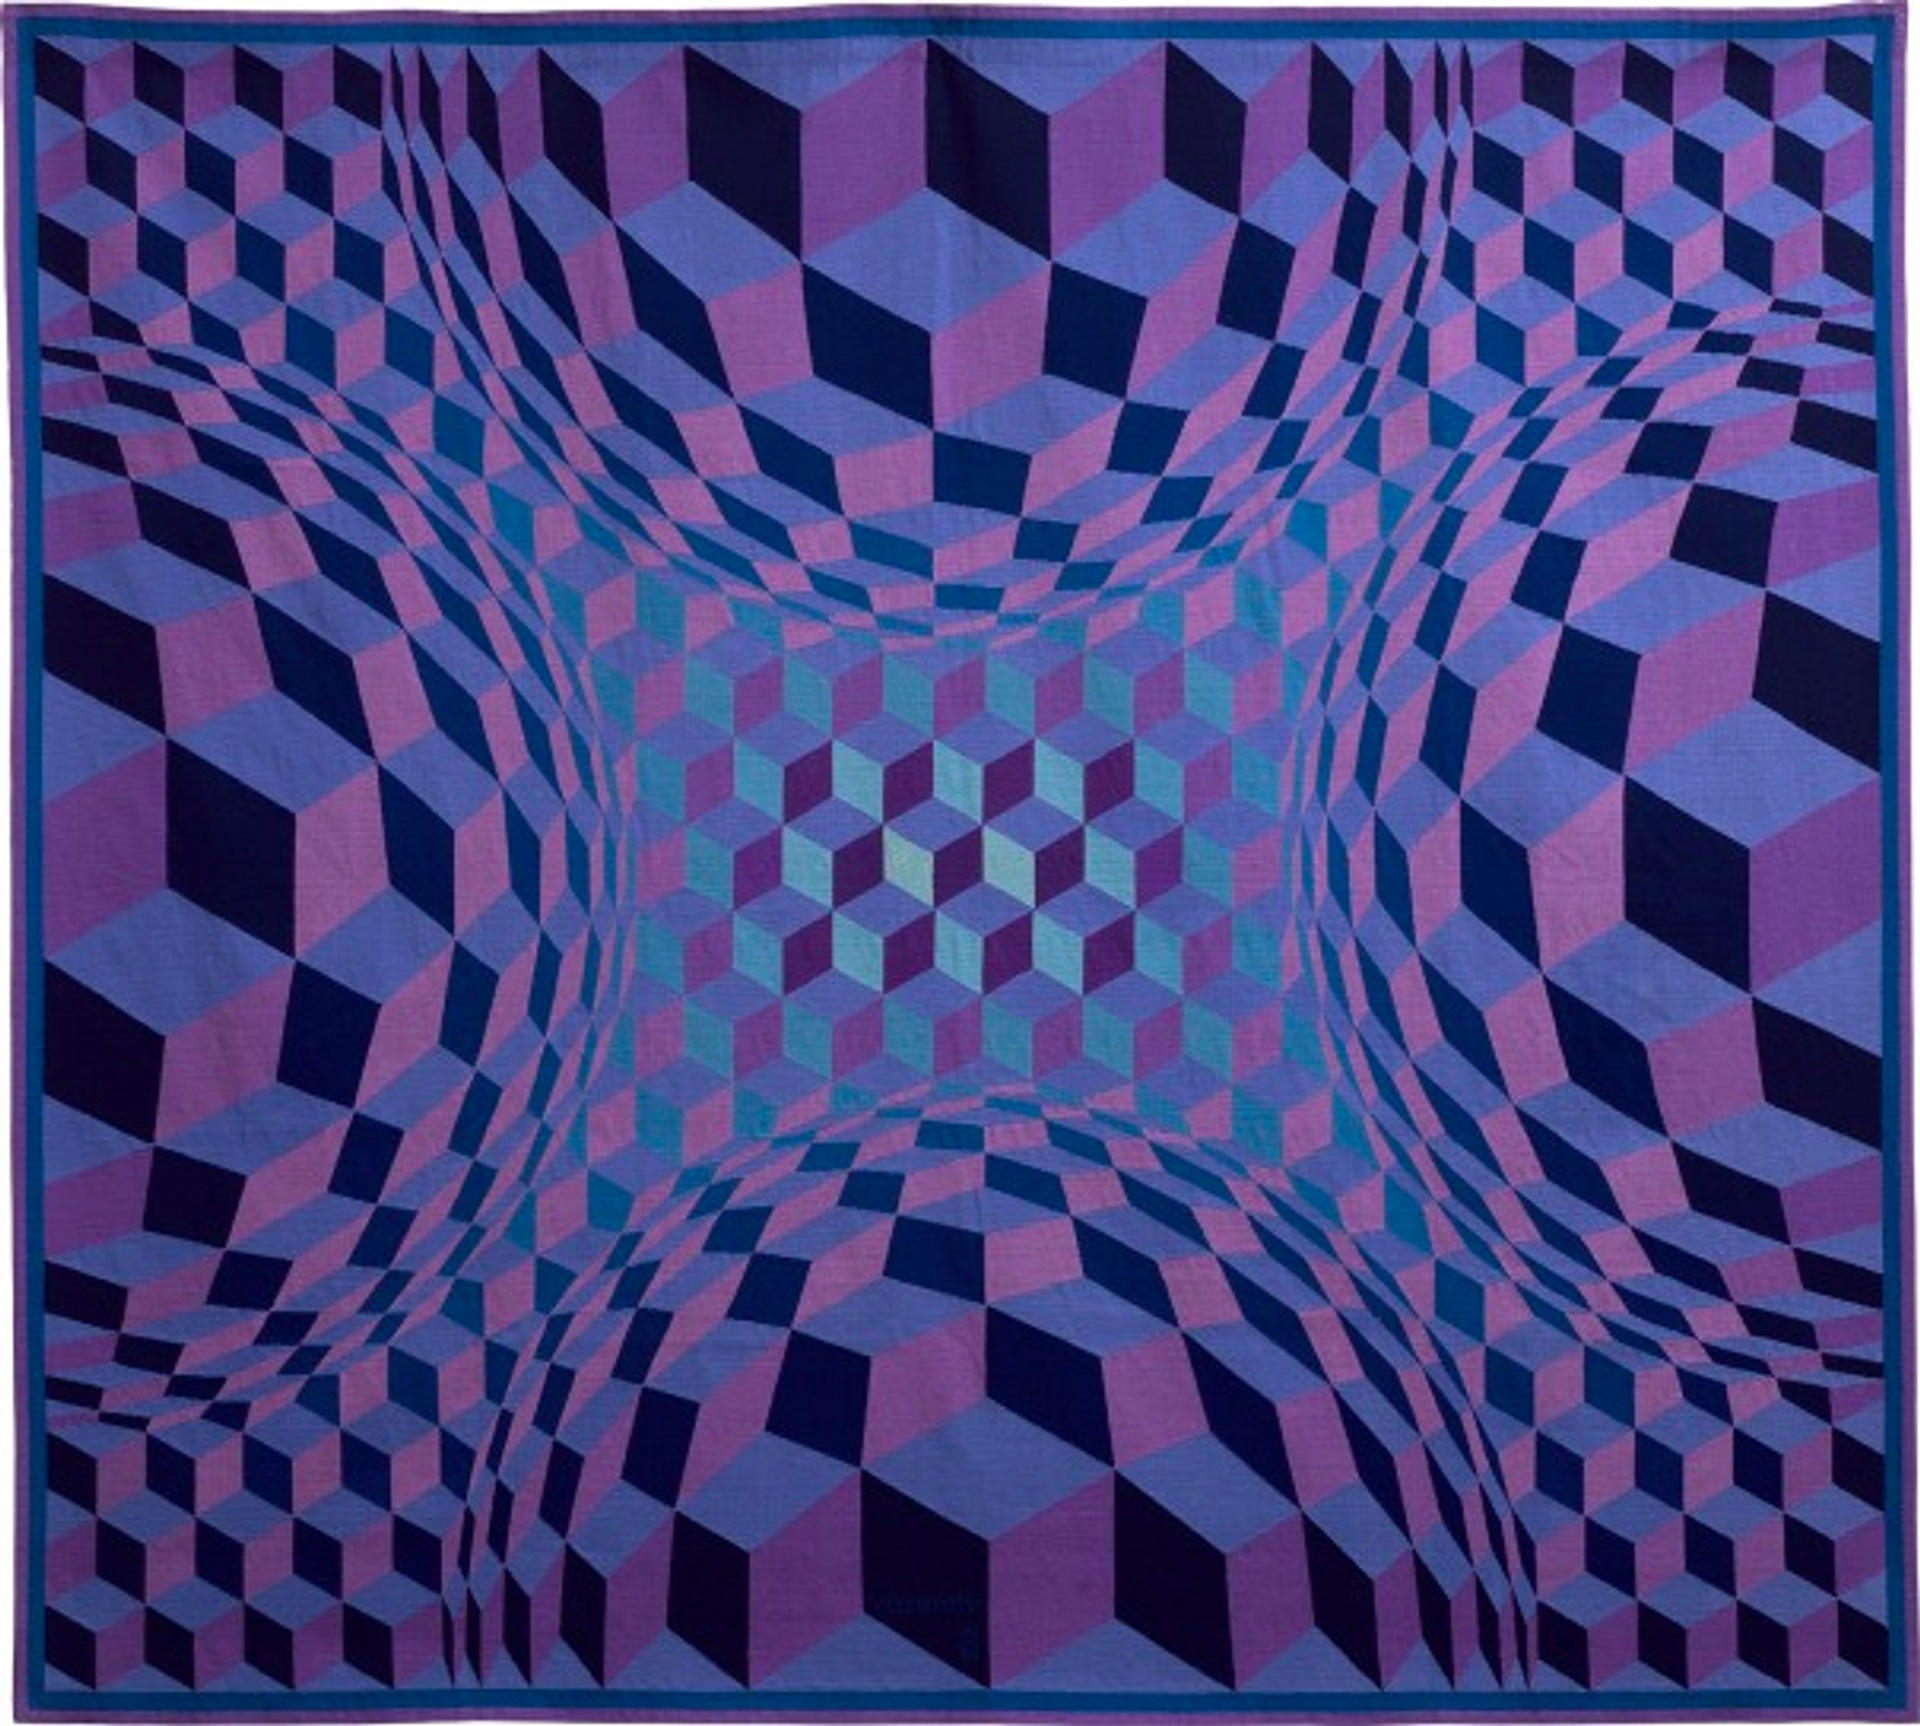 An abstracted composition made of various purple and blue three-dimensional cubes over-lapping each other to create a pull in-and-out optical effect.